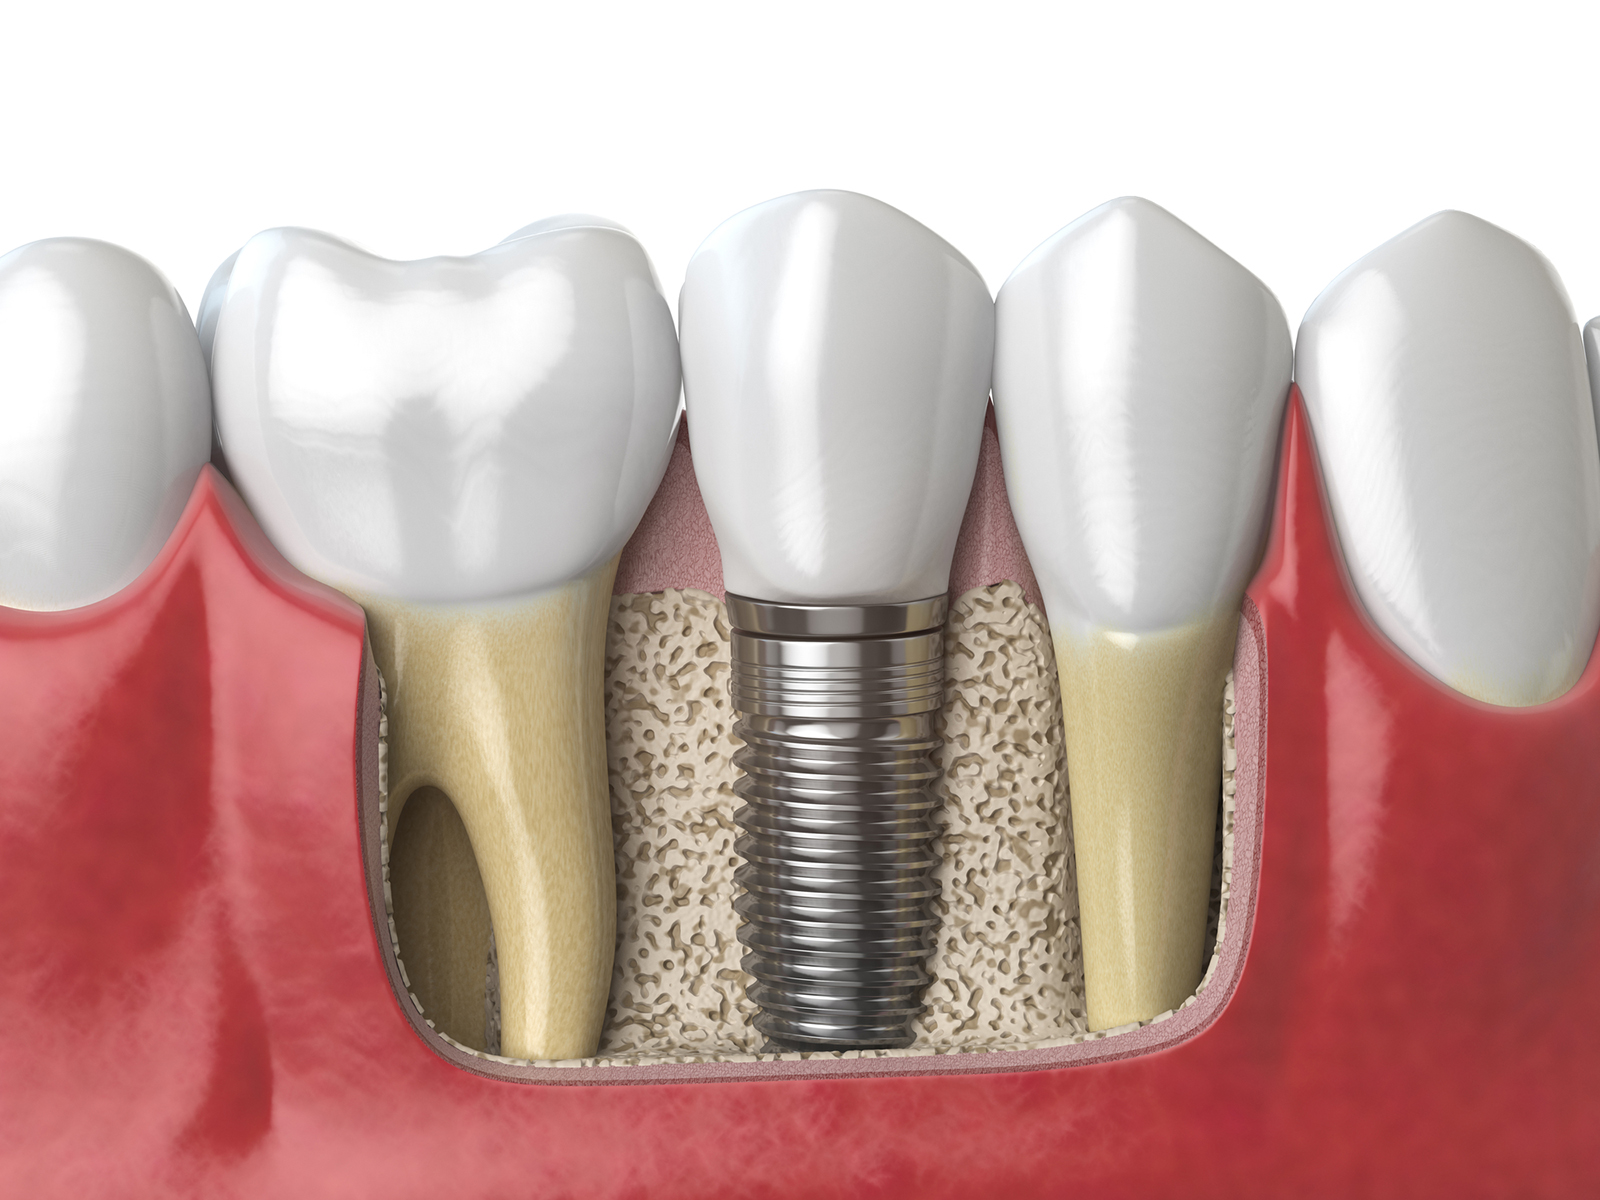 Are dental implants glued in?